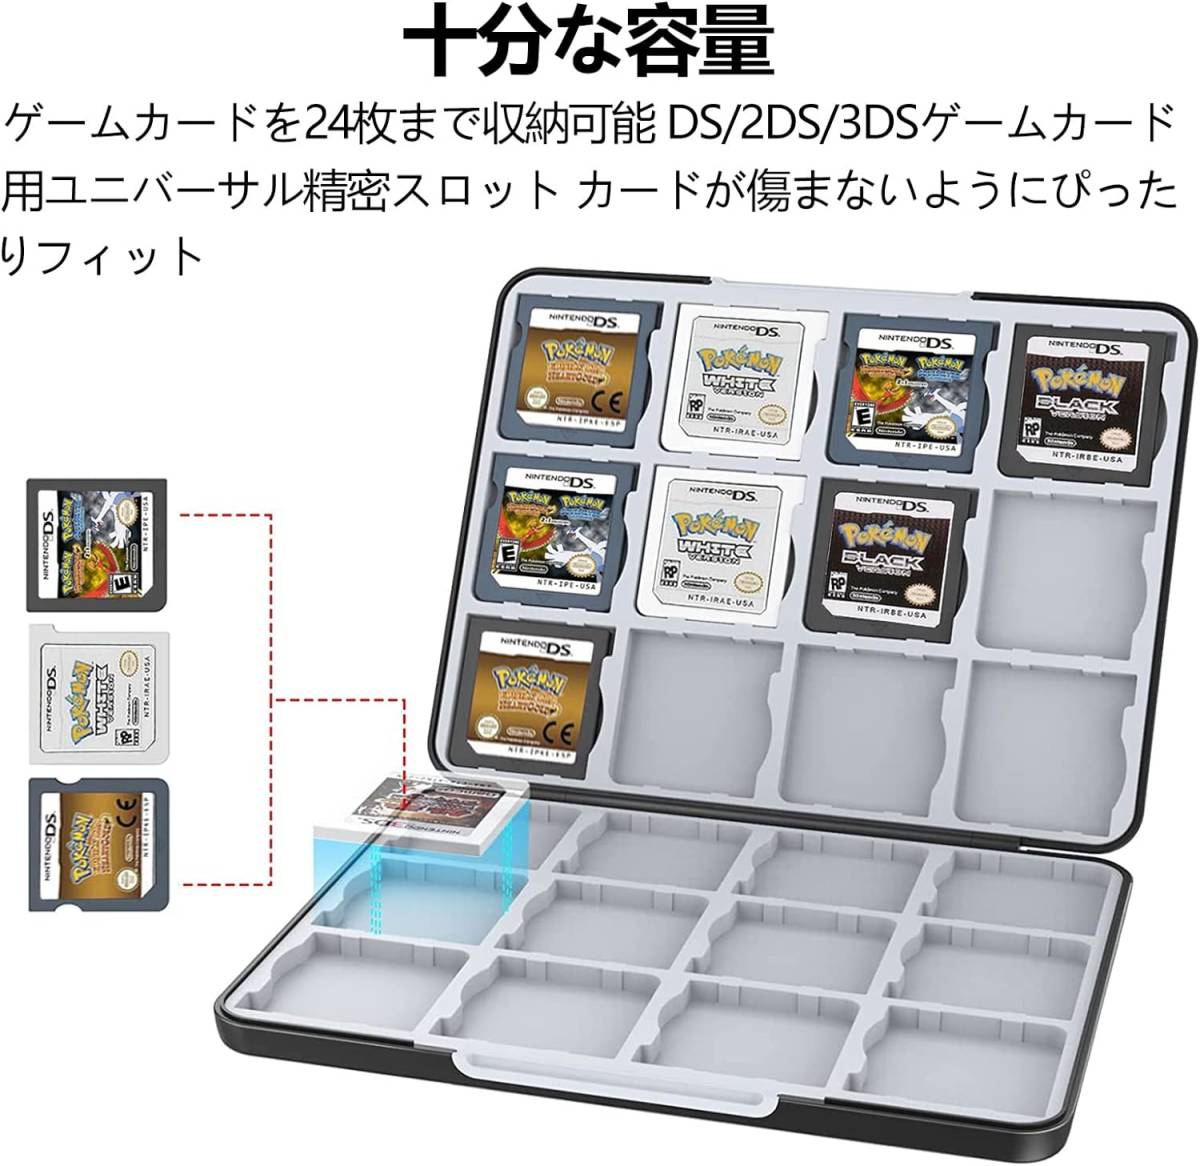 A PGRTYOF 3DS for card-case card-case 24 pcs storage for 3DS 2DS DS game. adjustment for semi hard,N